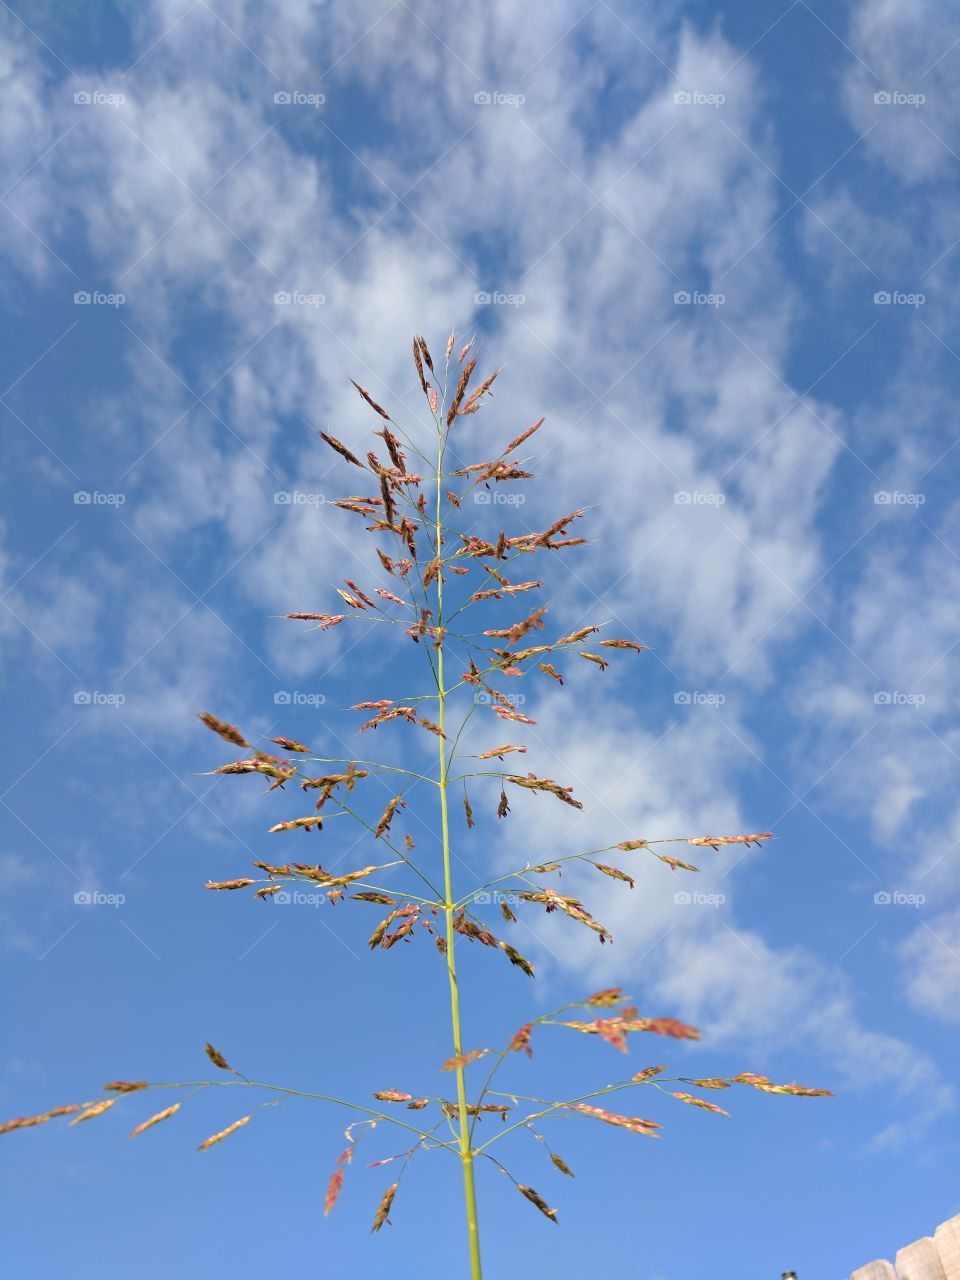 weed in the blue sky